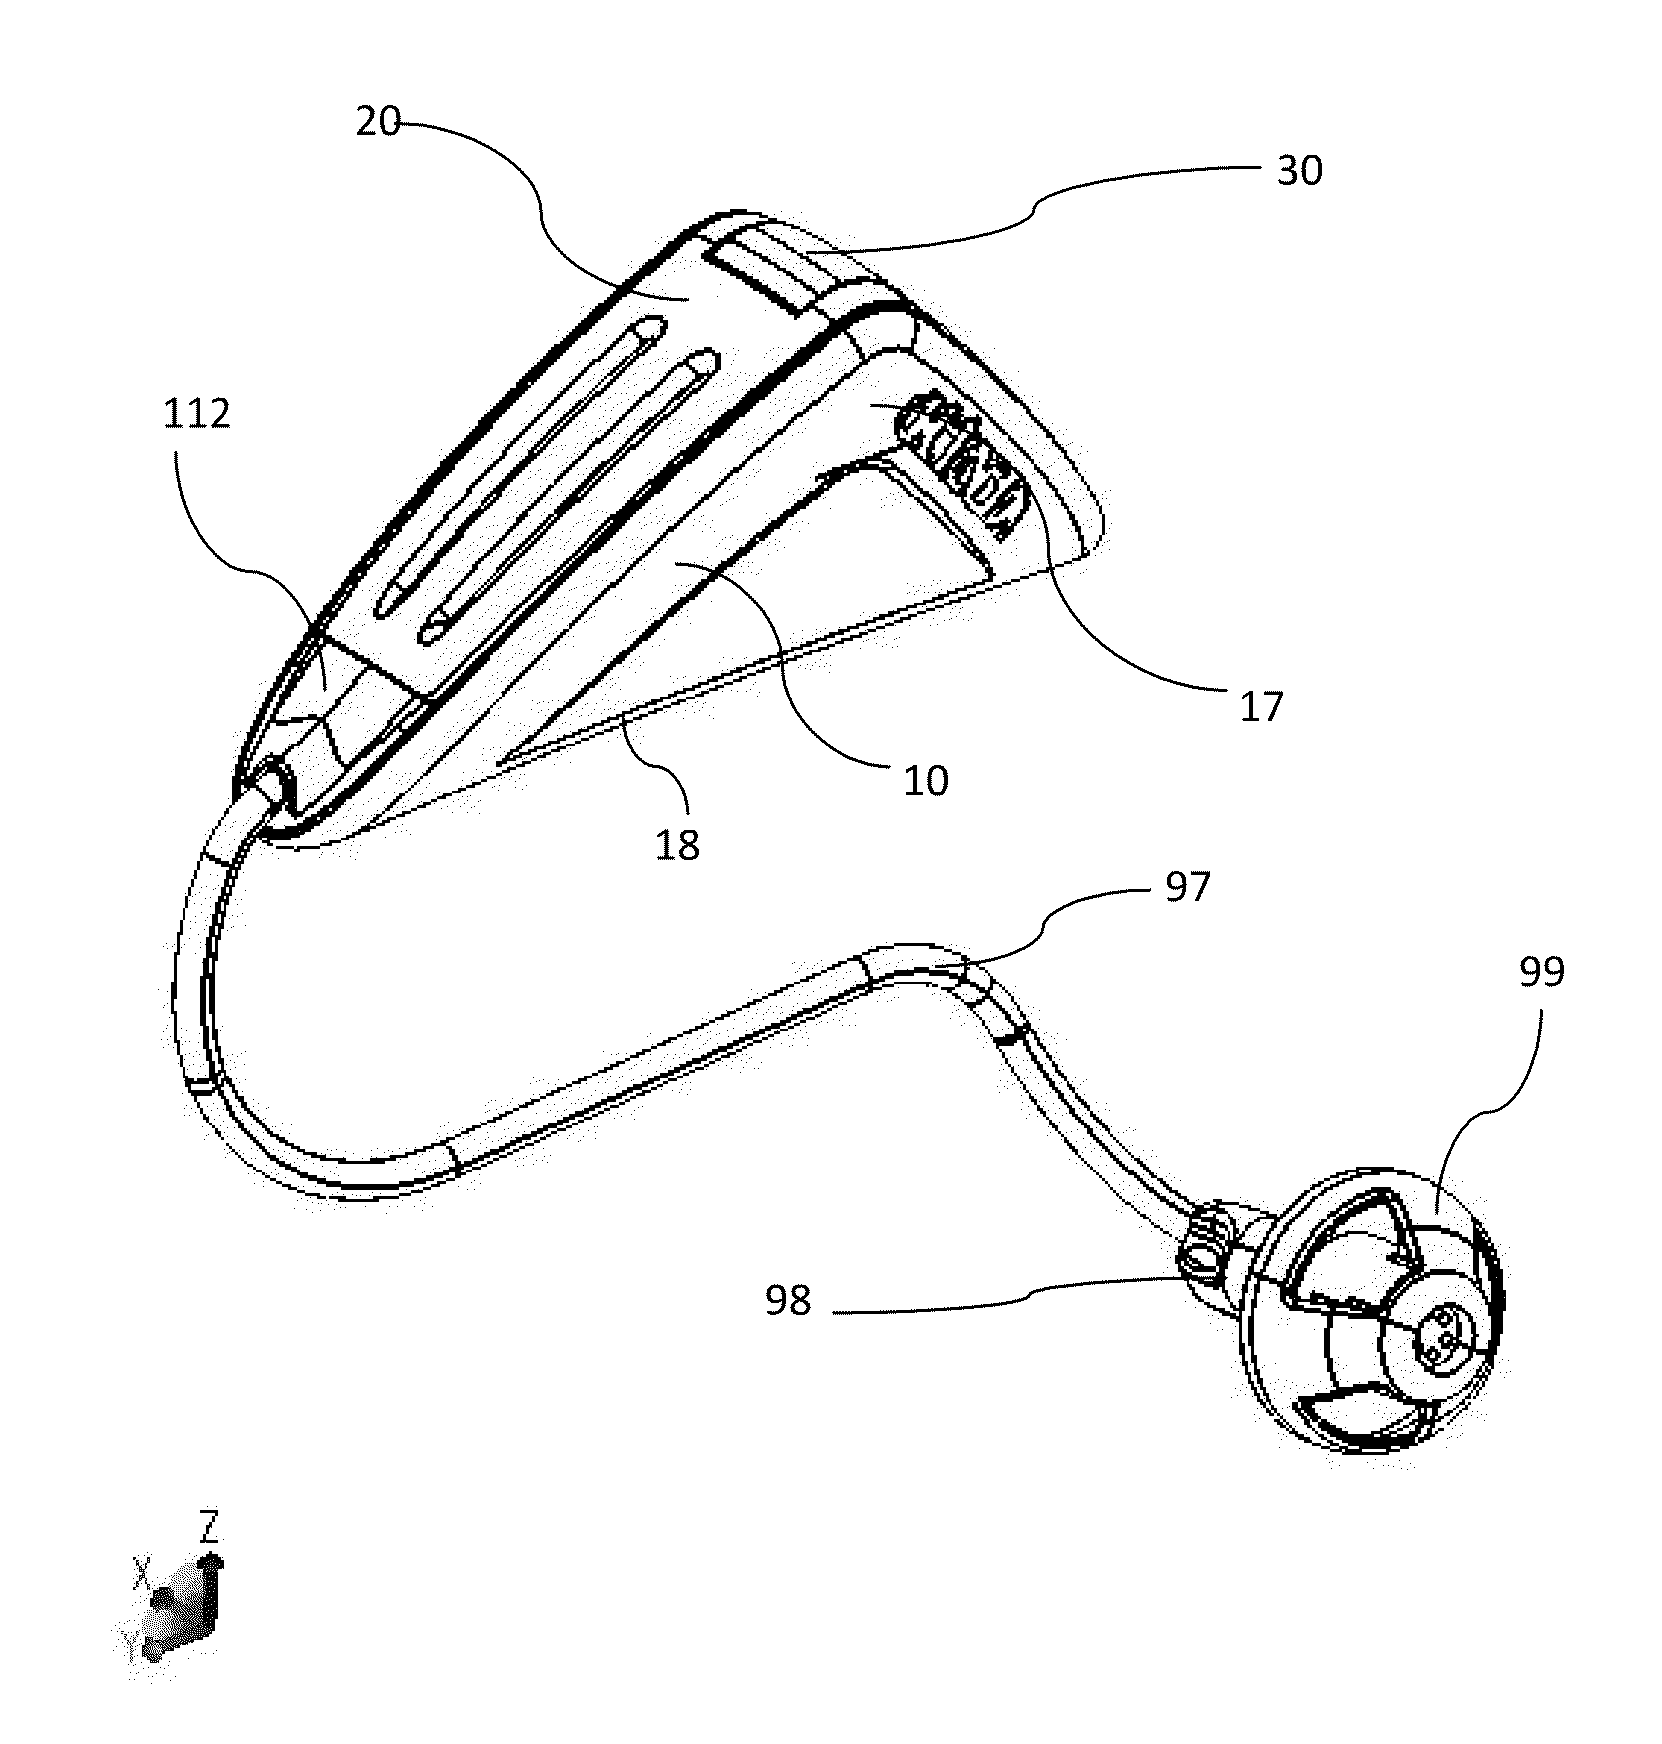 Hearing aid with exchangeable shell parts and wireless communication